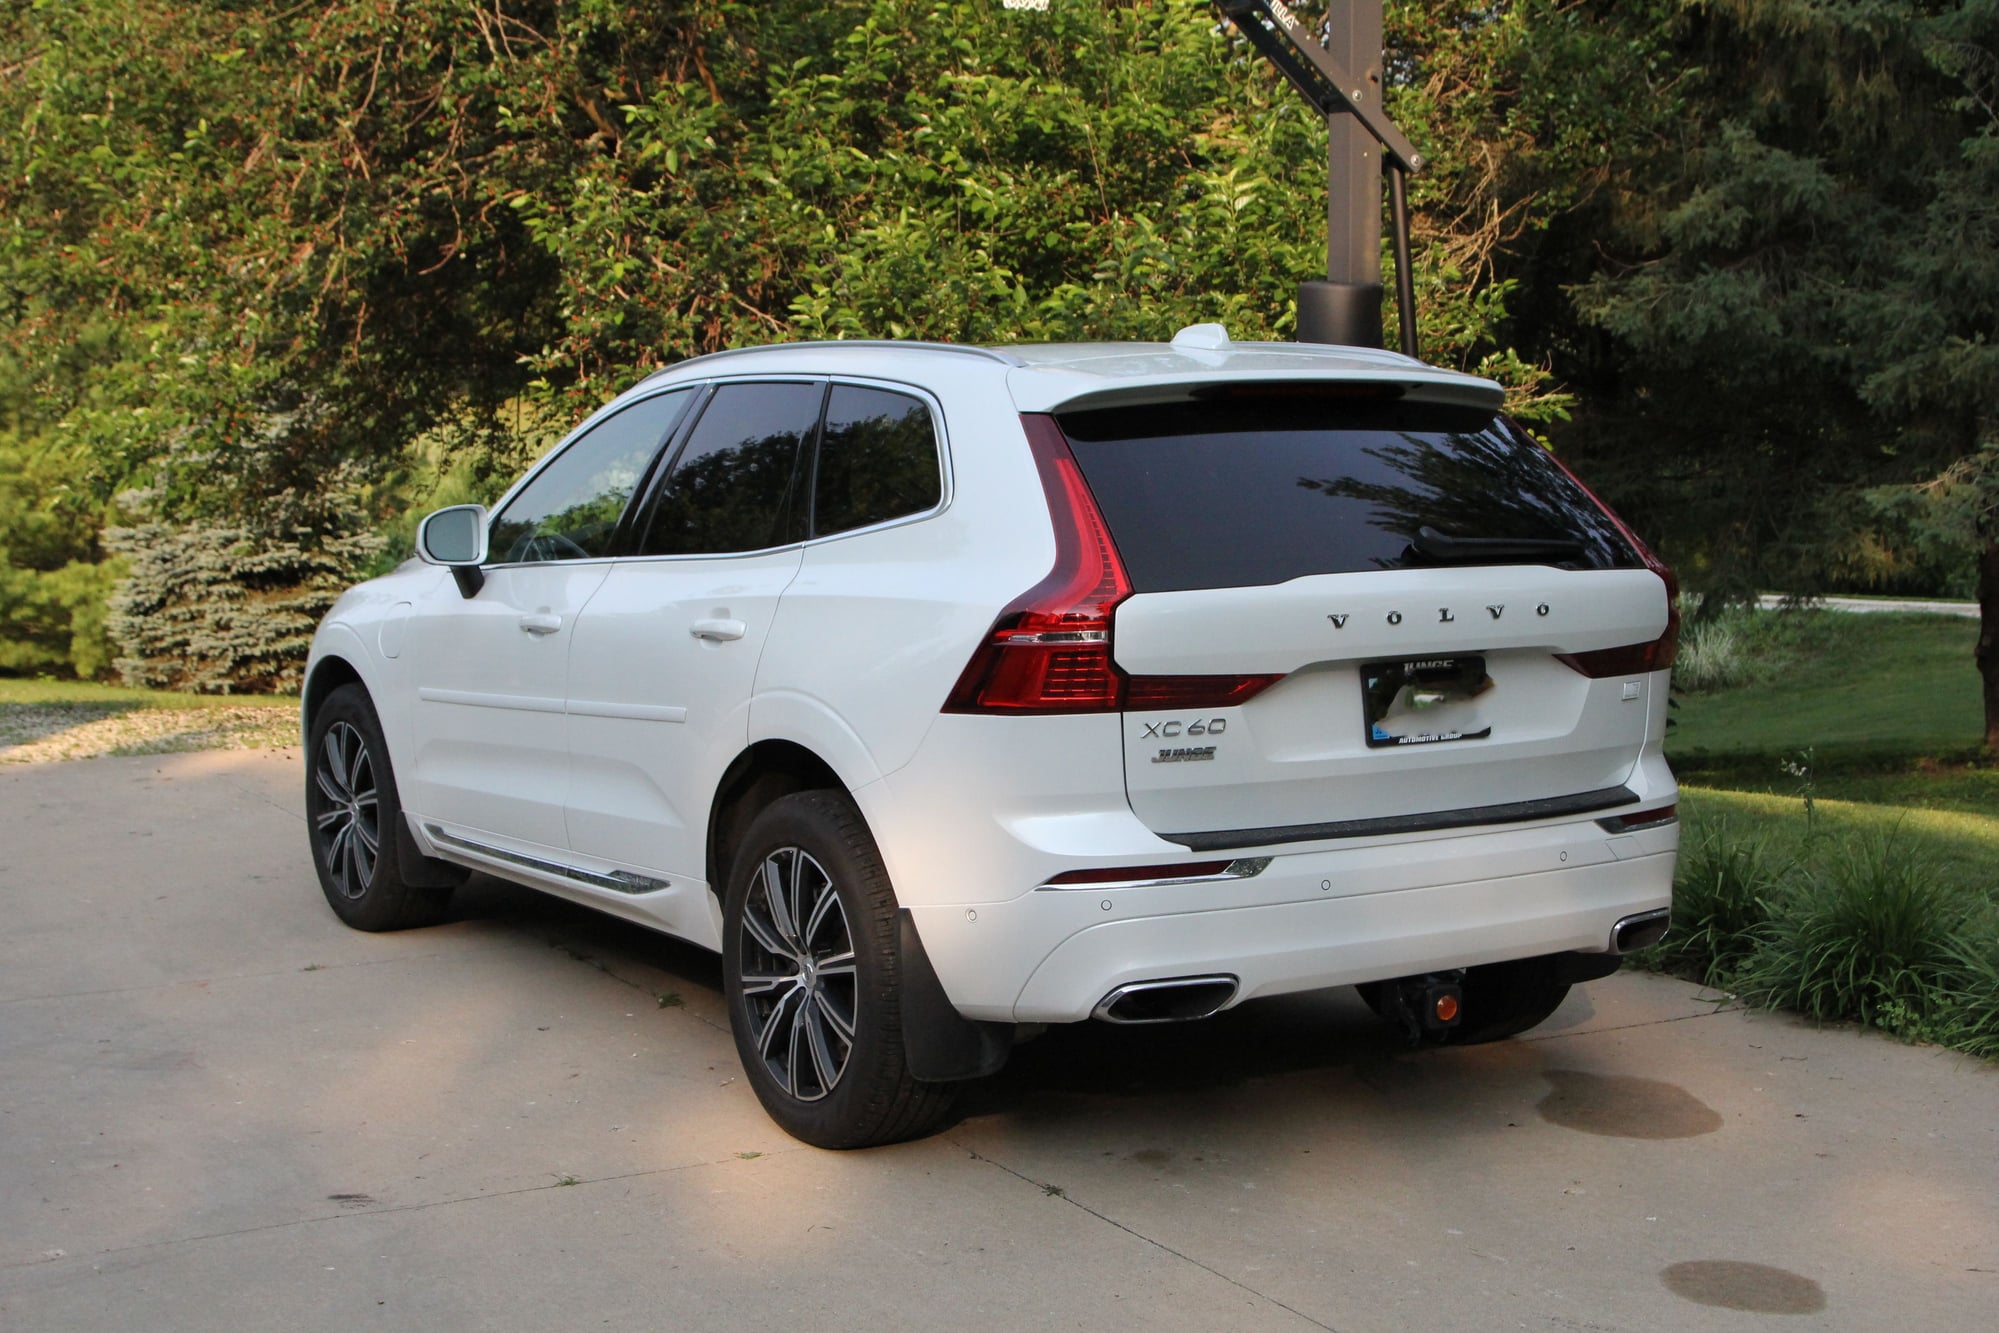 2021 Volvo XC60 - 2021 XC60 recharge - Used - VIN YV4BR0DL1M1765024 - 37,000 Miles - 4 cyl - AWD - Automatic - SUV - White - Cedar Rapids, IA 52405, United States